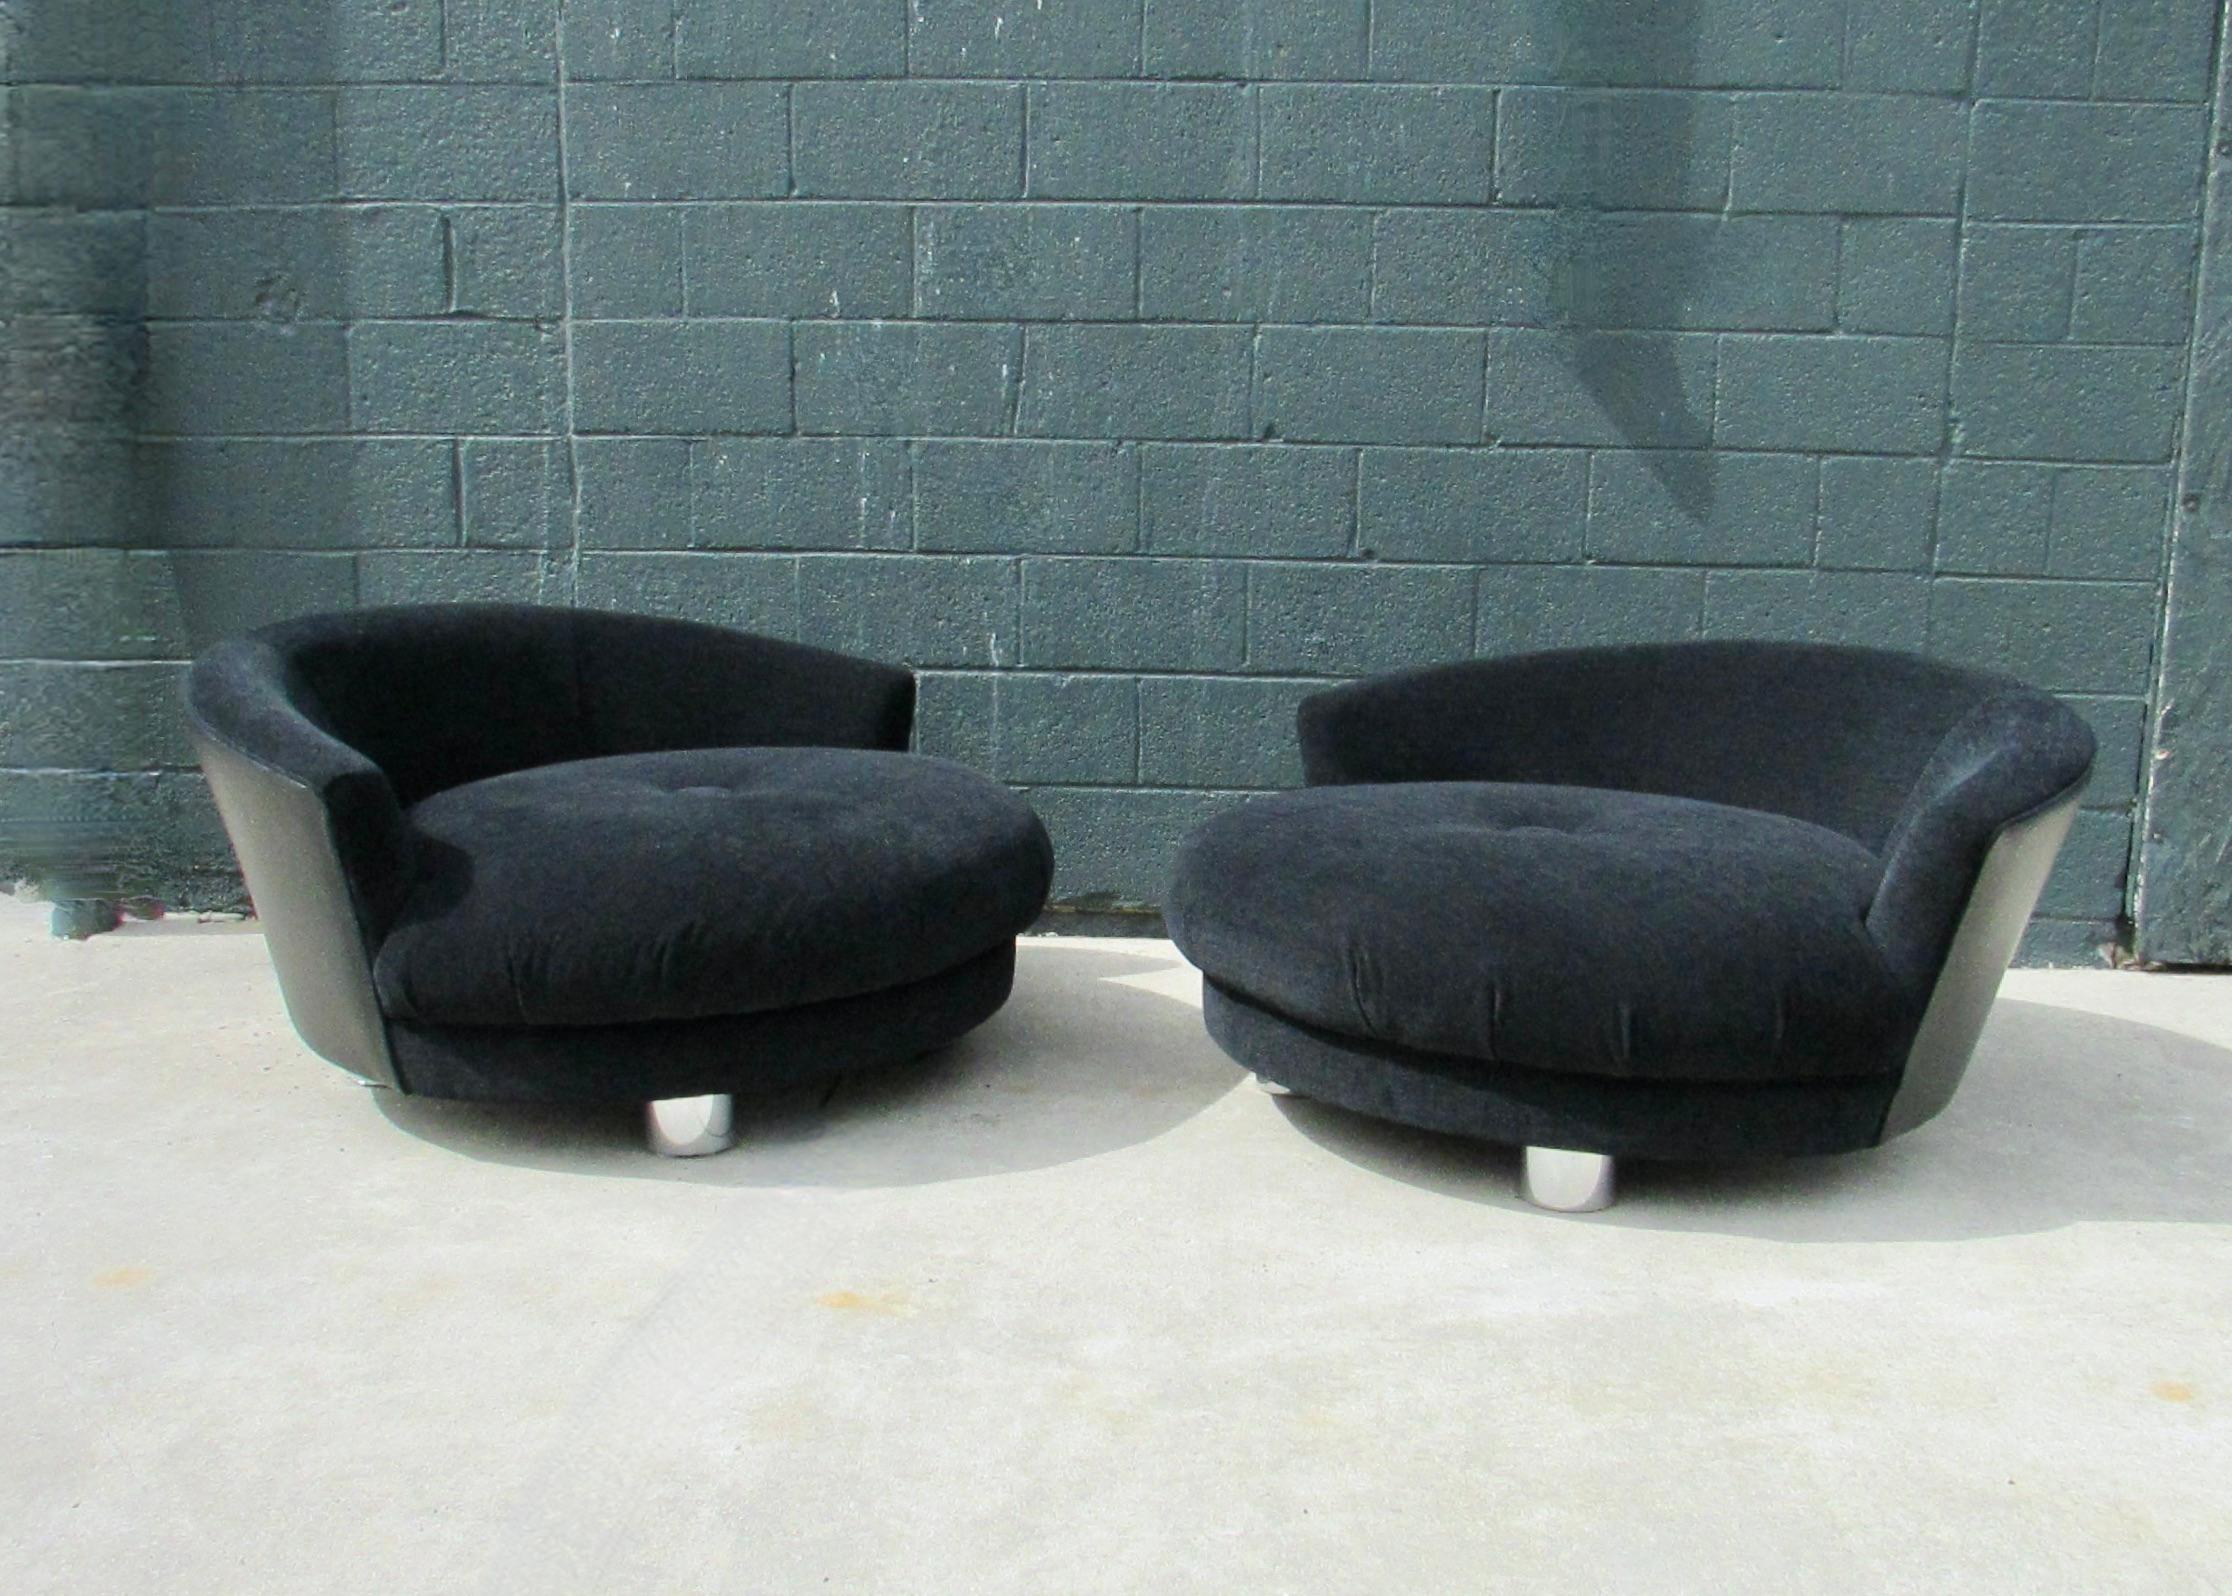 Large and inviting round lounge chairs. Perfect for partners to curl up in. Seat and backrest covered in black chenille backside done in black naugahyde. One center button tuft to seat. All sit on walnut legs wrapped in polished aluminum. Chair